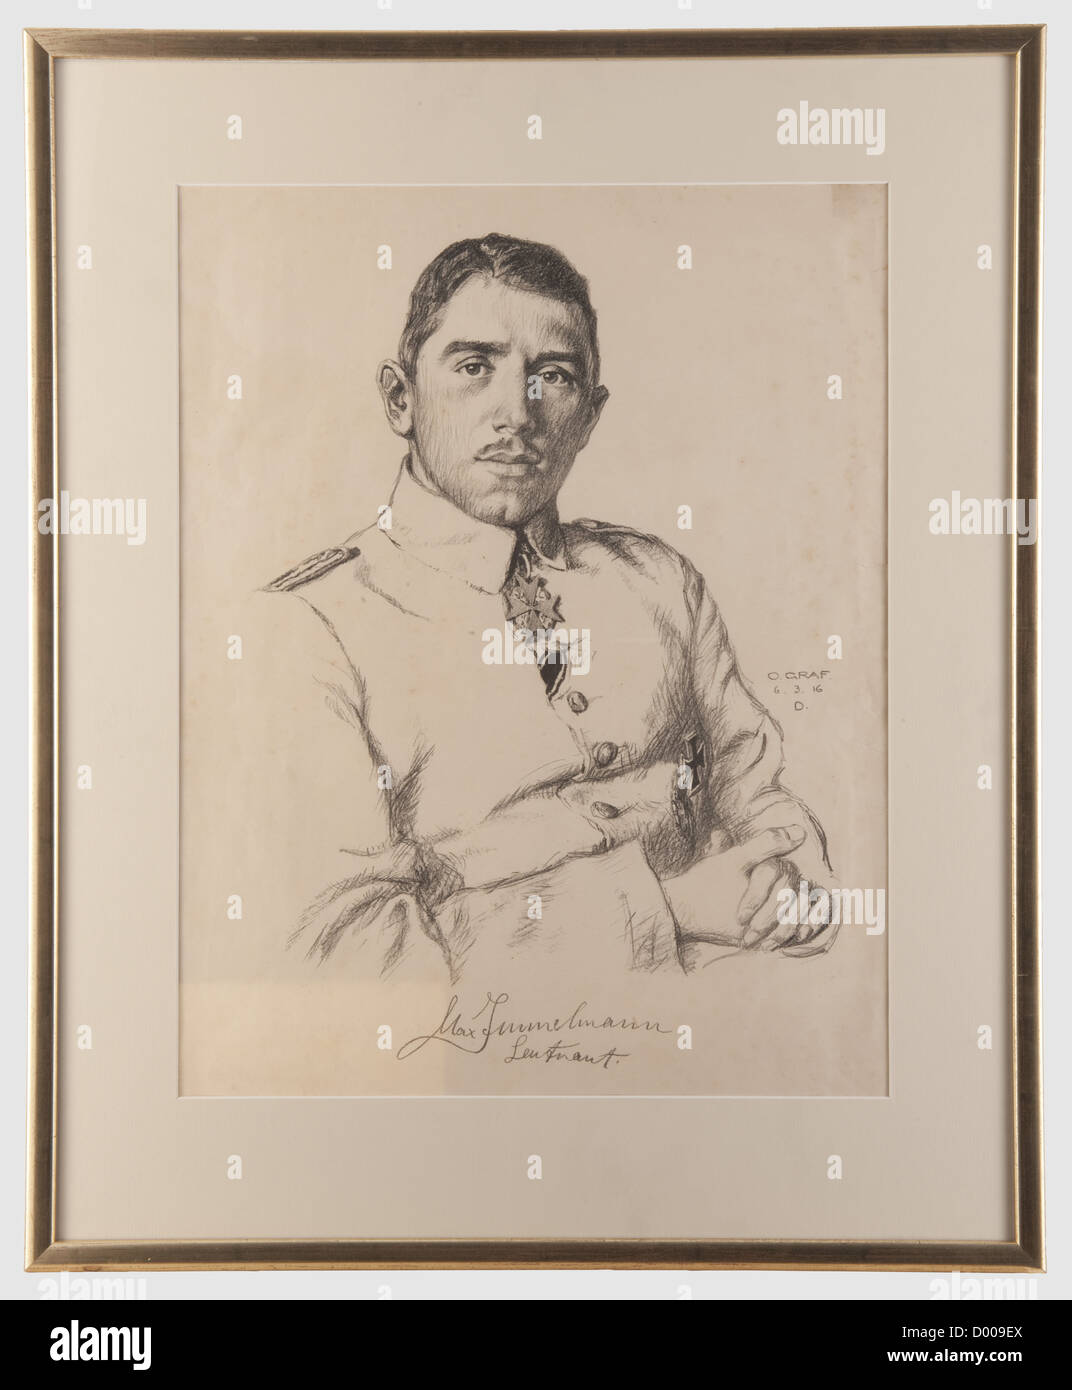 Oberleutnant Max Immelmann - a portrait drawing by Oscar Graf, . Charcoal on paper. Expressive half-length portrait of the 'Eagle of Lille' in uniform with Pour le mérite around his neck and Iron Cross on his chest. Signed and dated 'O. Graf 6.3.16' on the right, the lower edge hand-signed by Immelmann 'Max Immelmann Leutnant', the reverse with a hand-written dedication in pencil reading 'Zur Erinnerung! M. Immelmann Leutnant.' The frame of later date, mounted and under glass. 61 x 50 cm. Professor Oskar Graf (1873 - 1957) member of the Secession in 1896, studi, Stock Photo